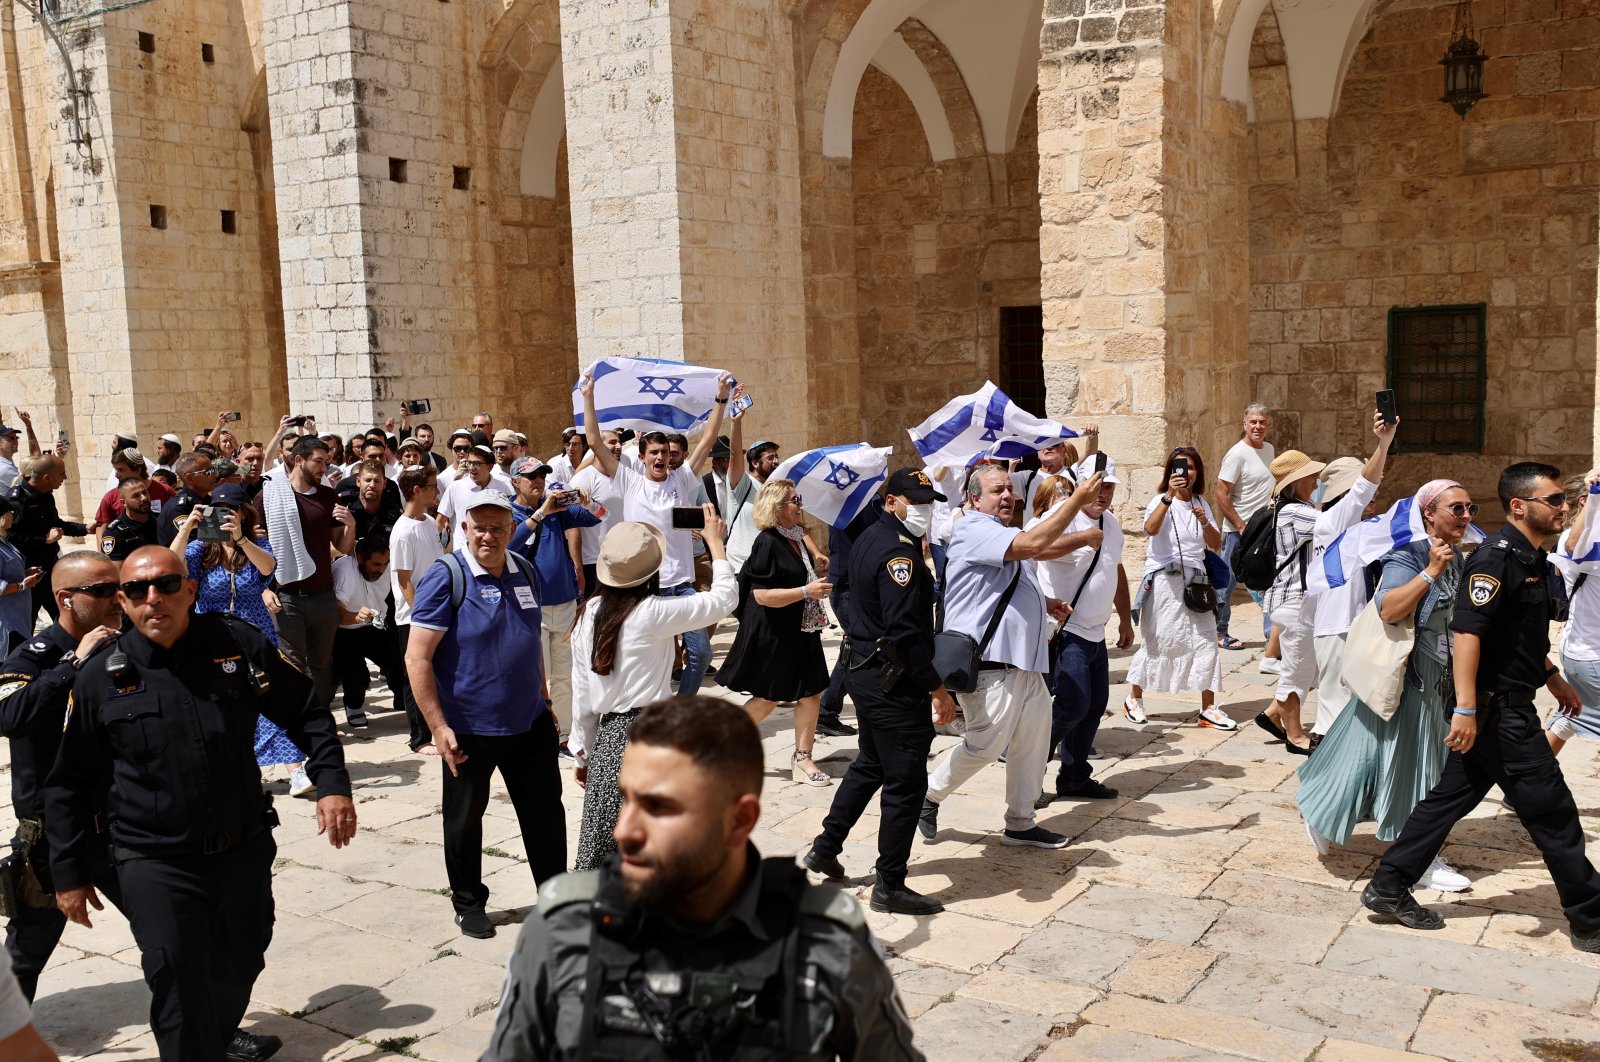 Hundreds of fanatical Israelis accompanied by Israeli police raid Al-Aqsa Mosque on &quot;flag parade&quot; day, occupied East Jerusalem, Palestine, May 29, 2022. (AA Photo)